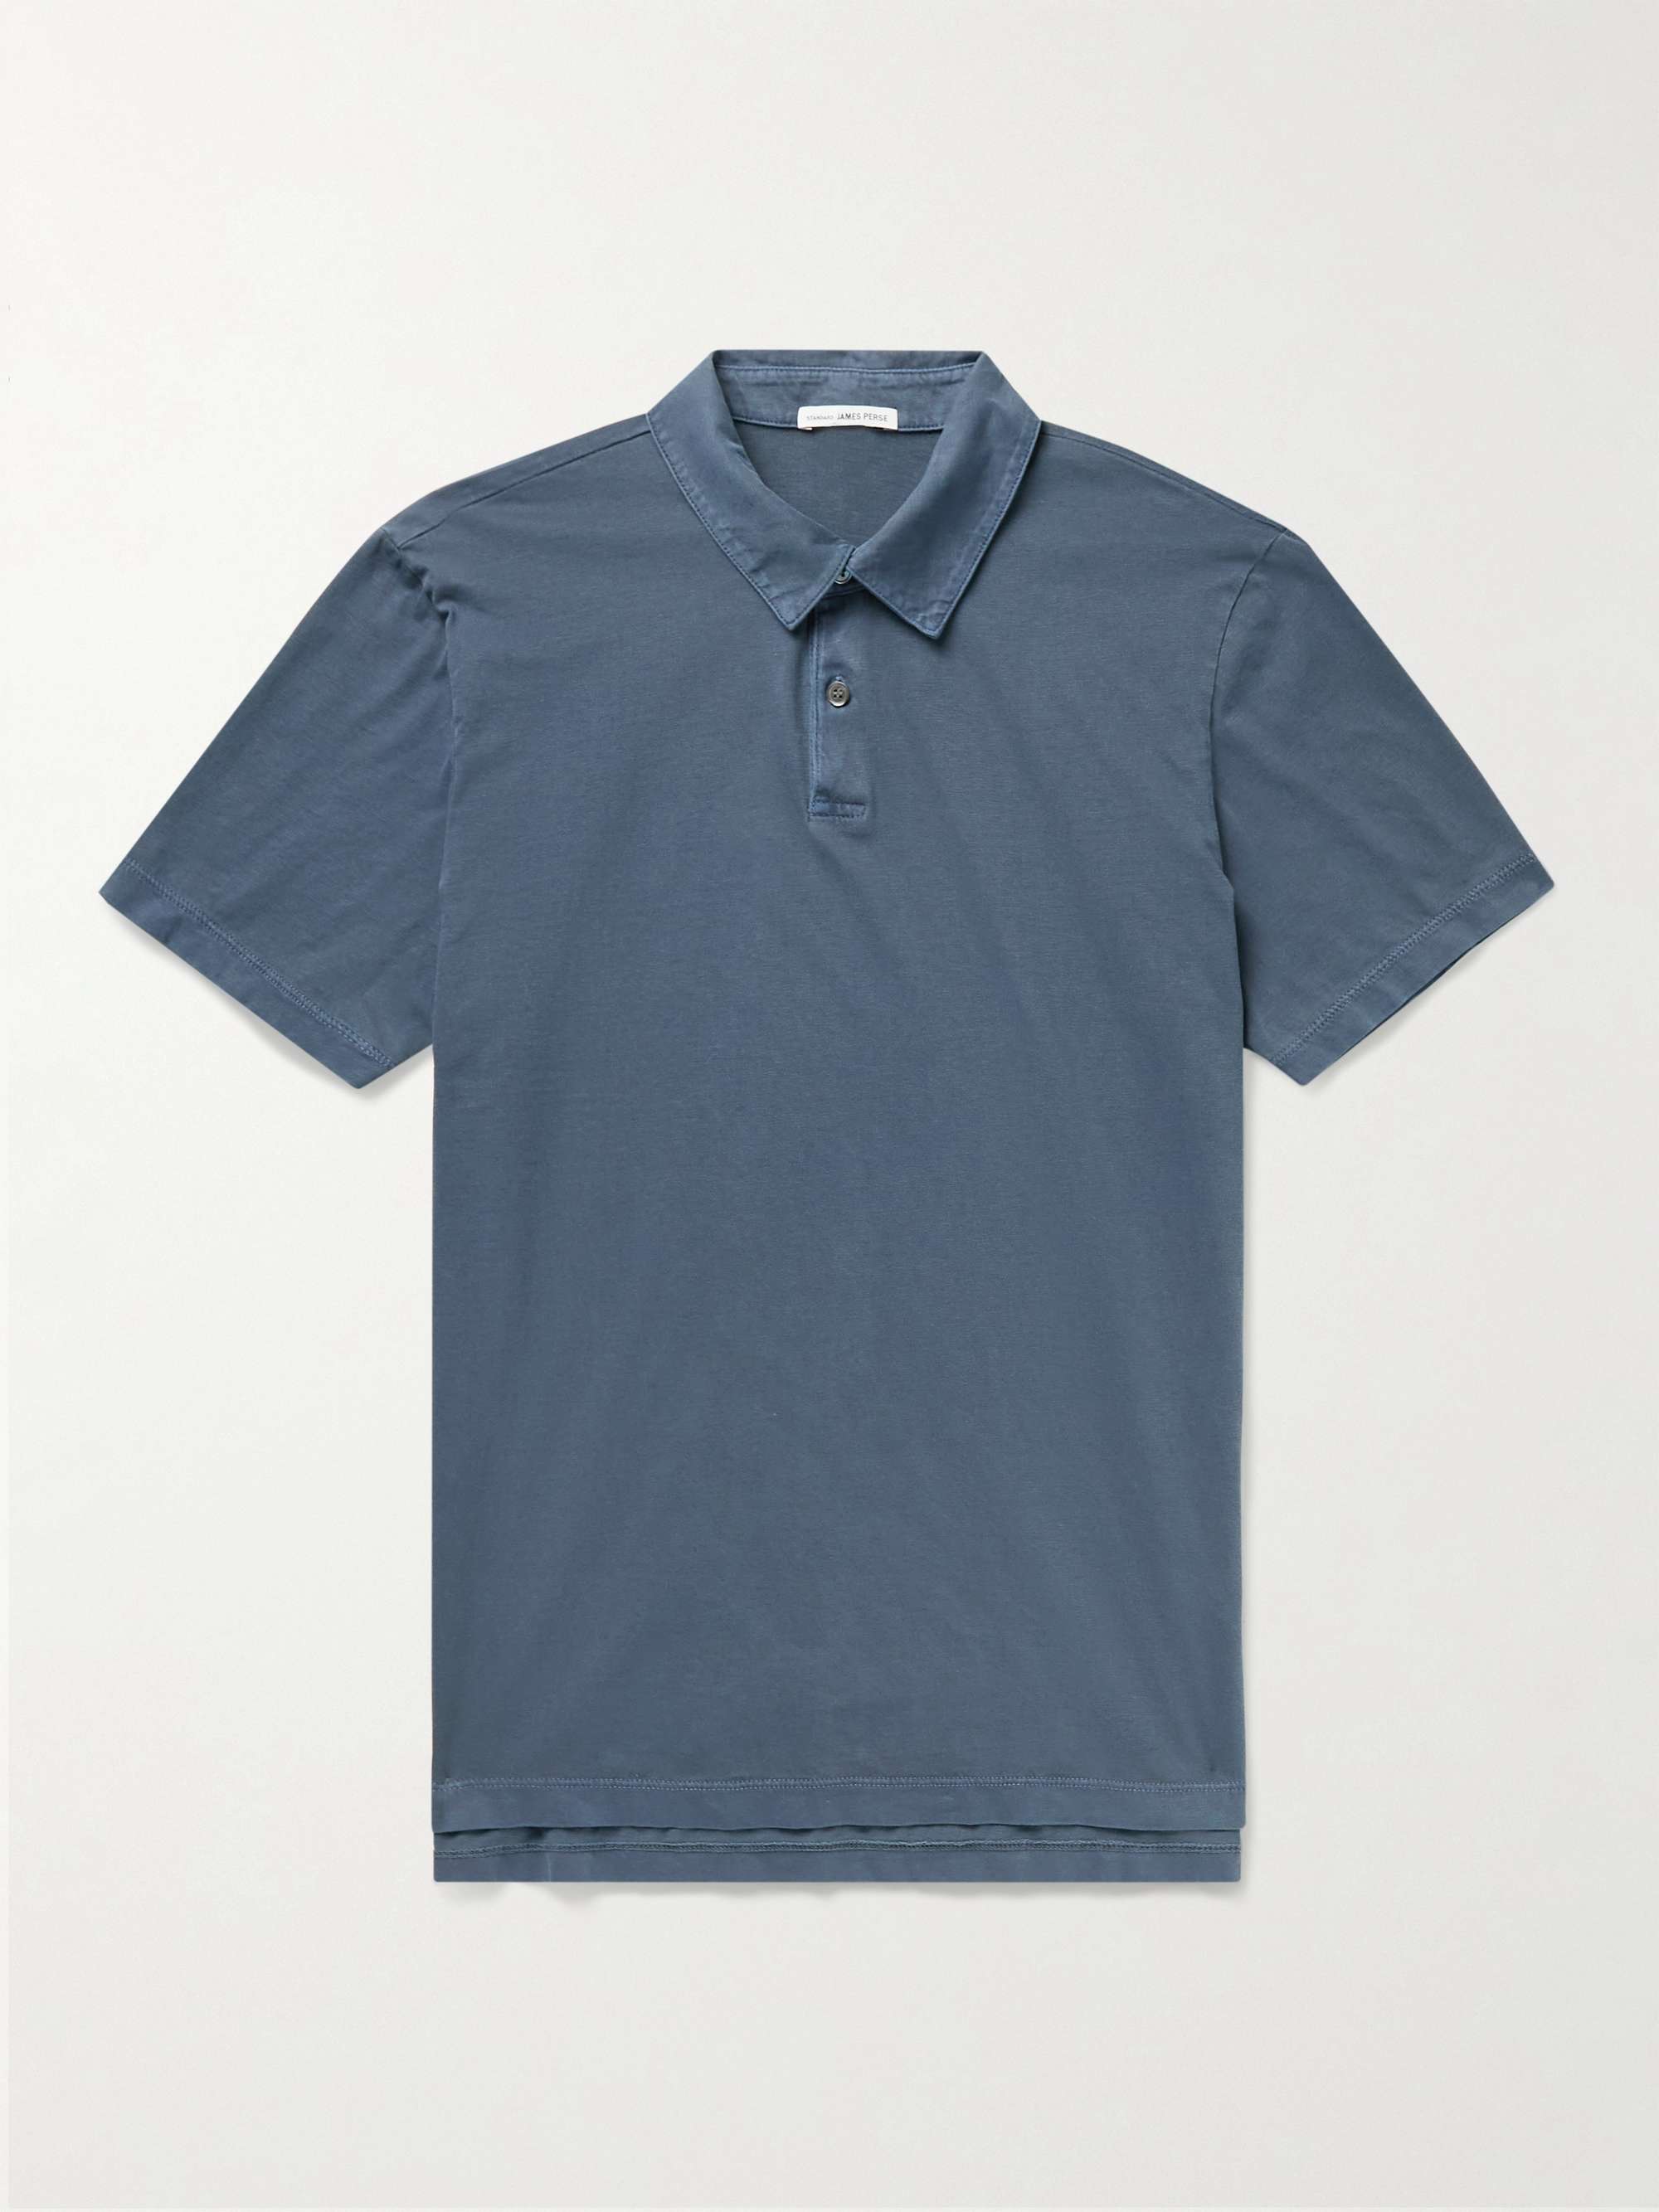 JAMES PERSE Slim-Fit Supima Cotton-Jersey Polo Shirt